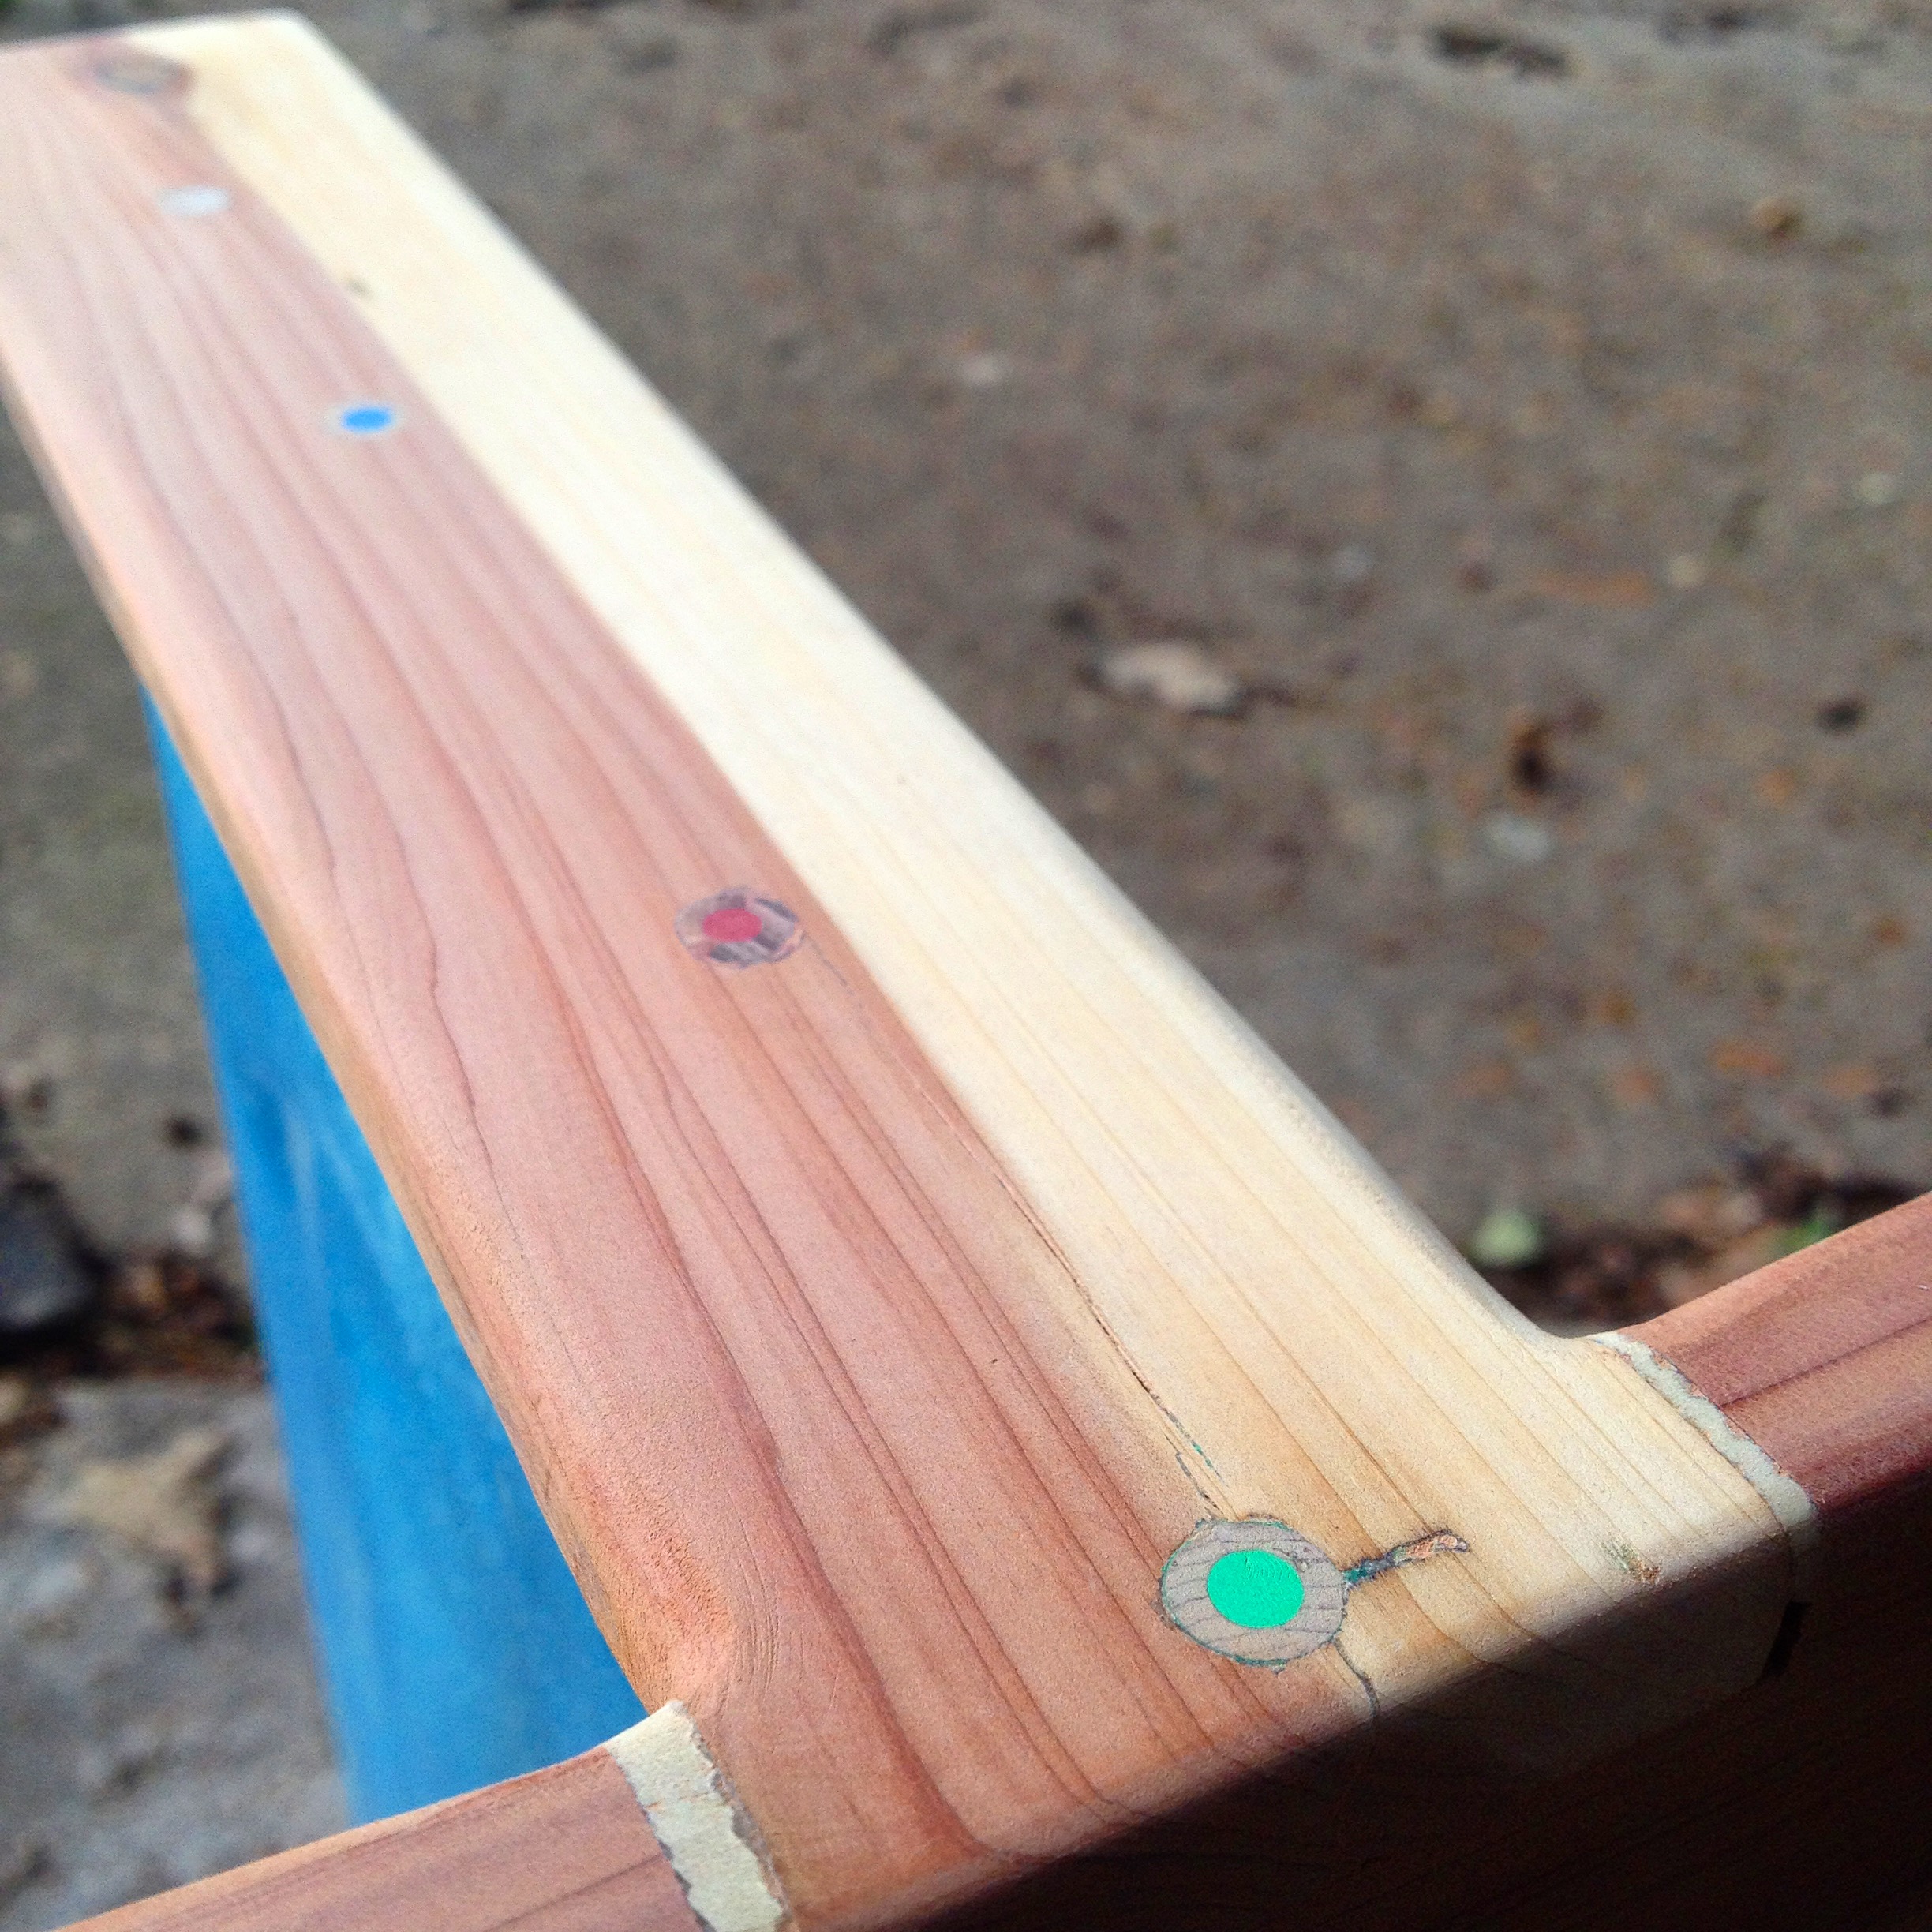  This piece on top is to securely attach the stabilizer board from the top, in addition to the back side and the bottom. It is secured using colored pencils as dowels! I thought it would be a fun way to add spots of color while retaining some classin